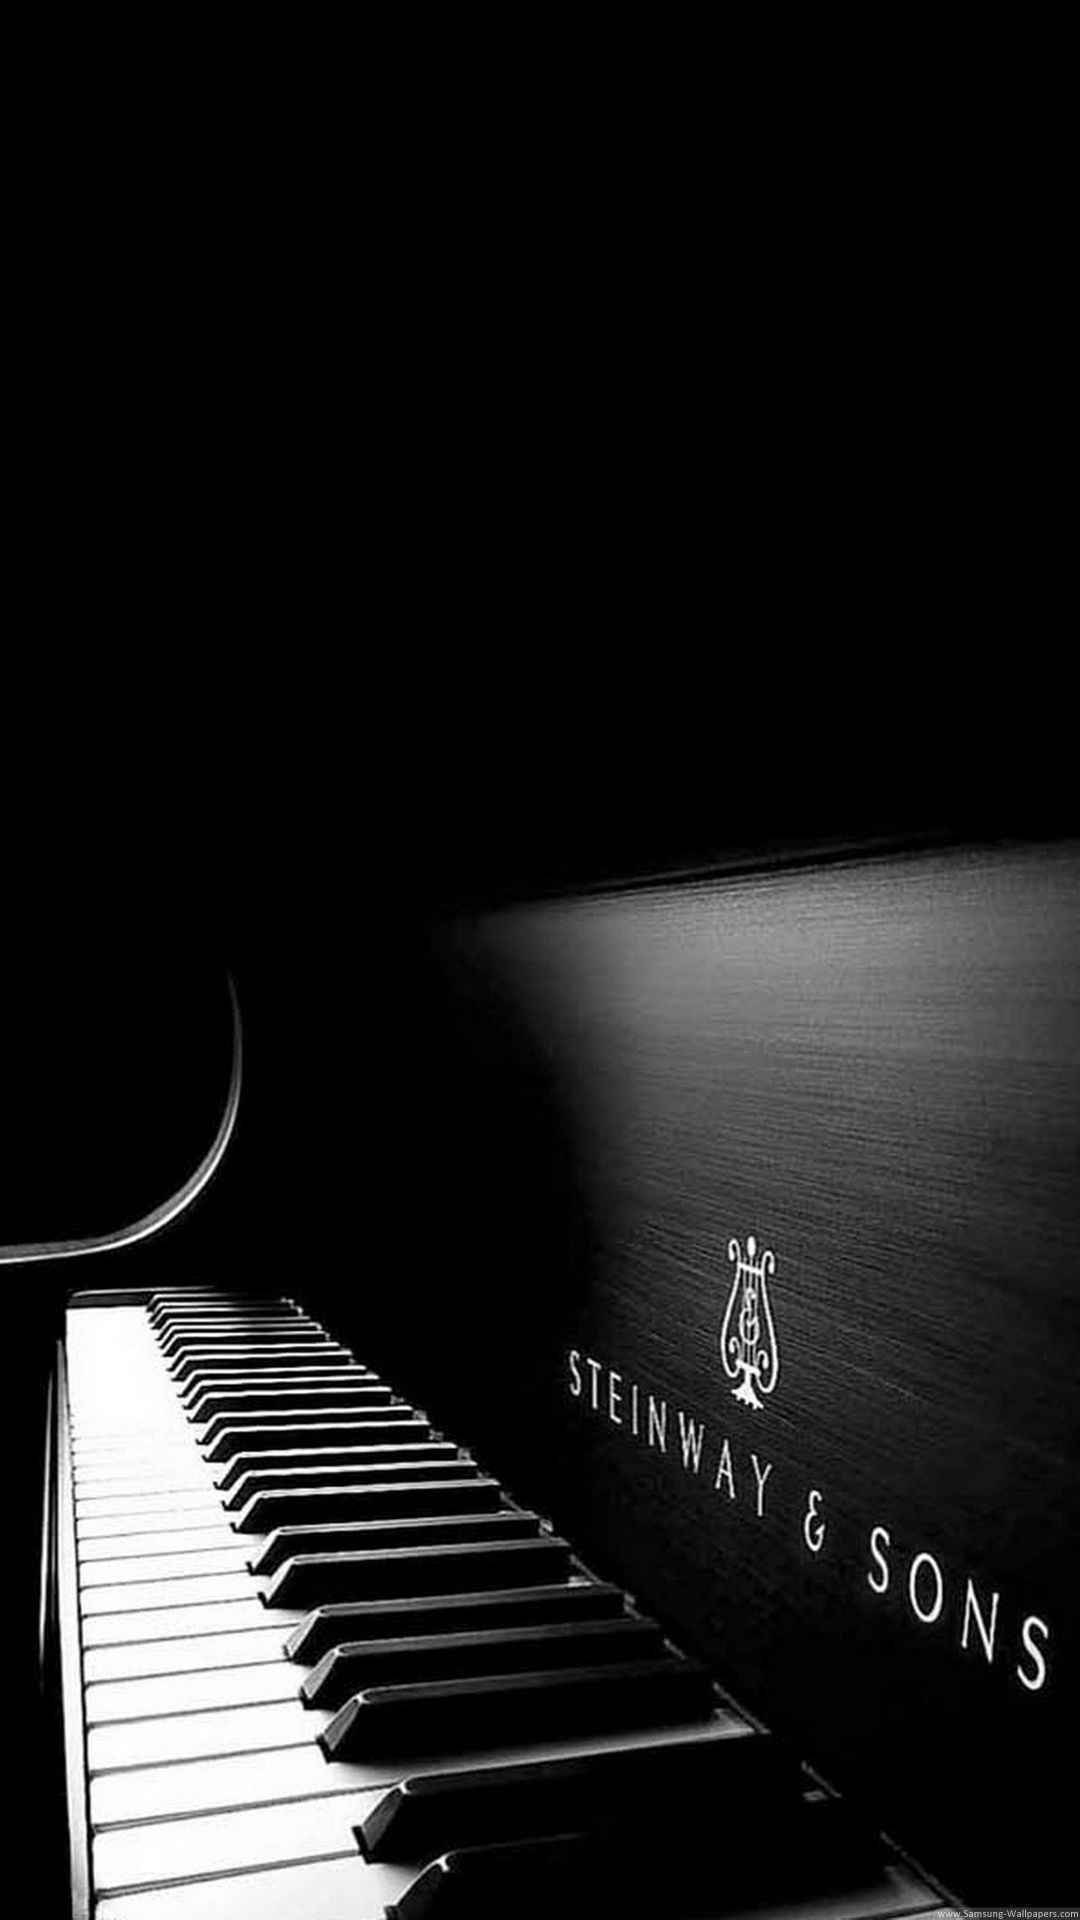 Music iPhone Wallpaper For Music Manias. Piano photography, Music wallpaper, Piano music